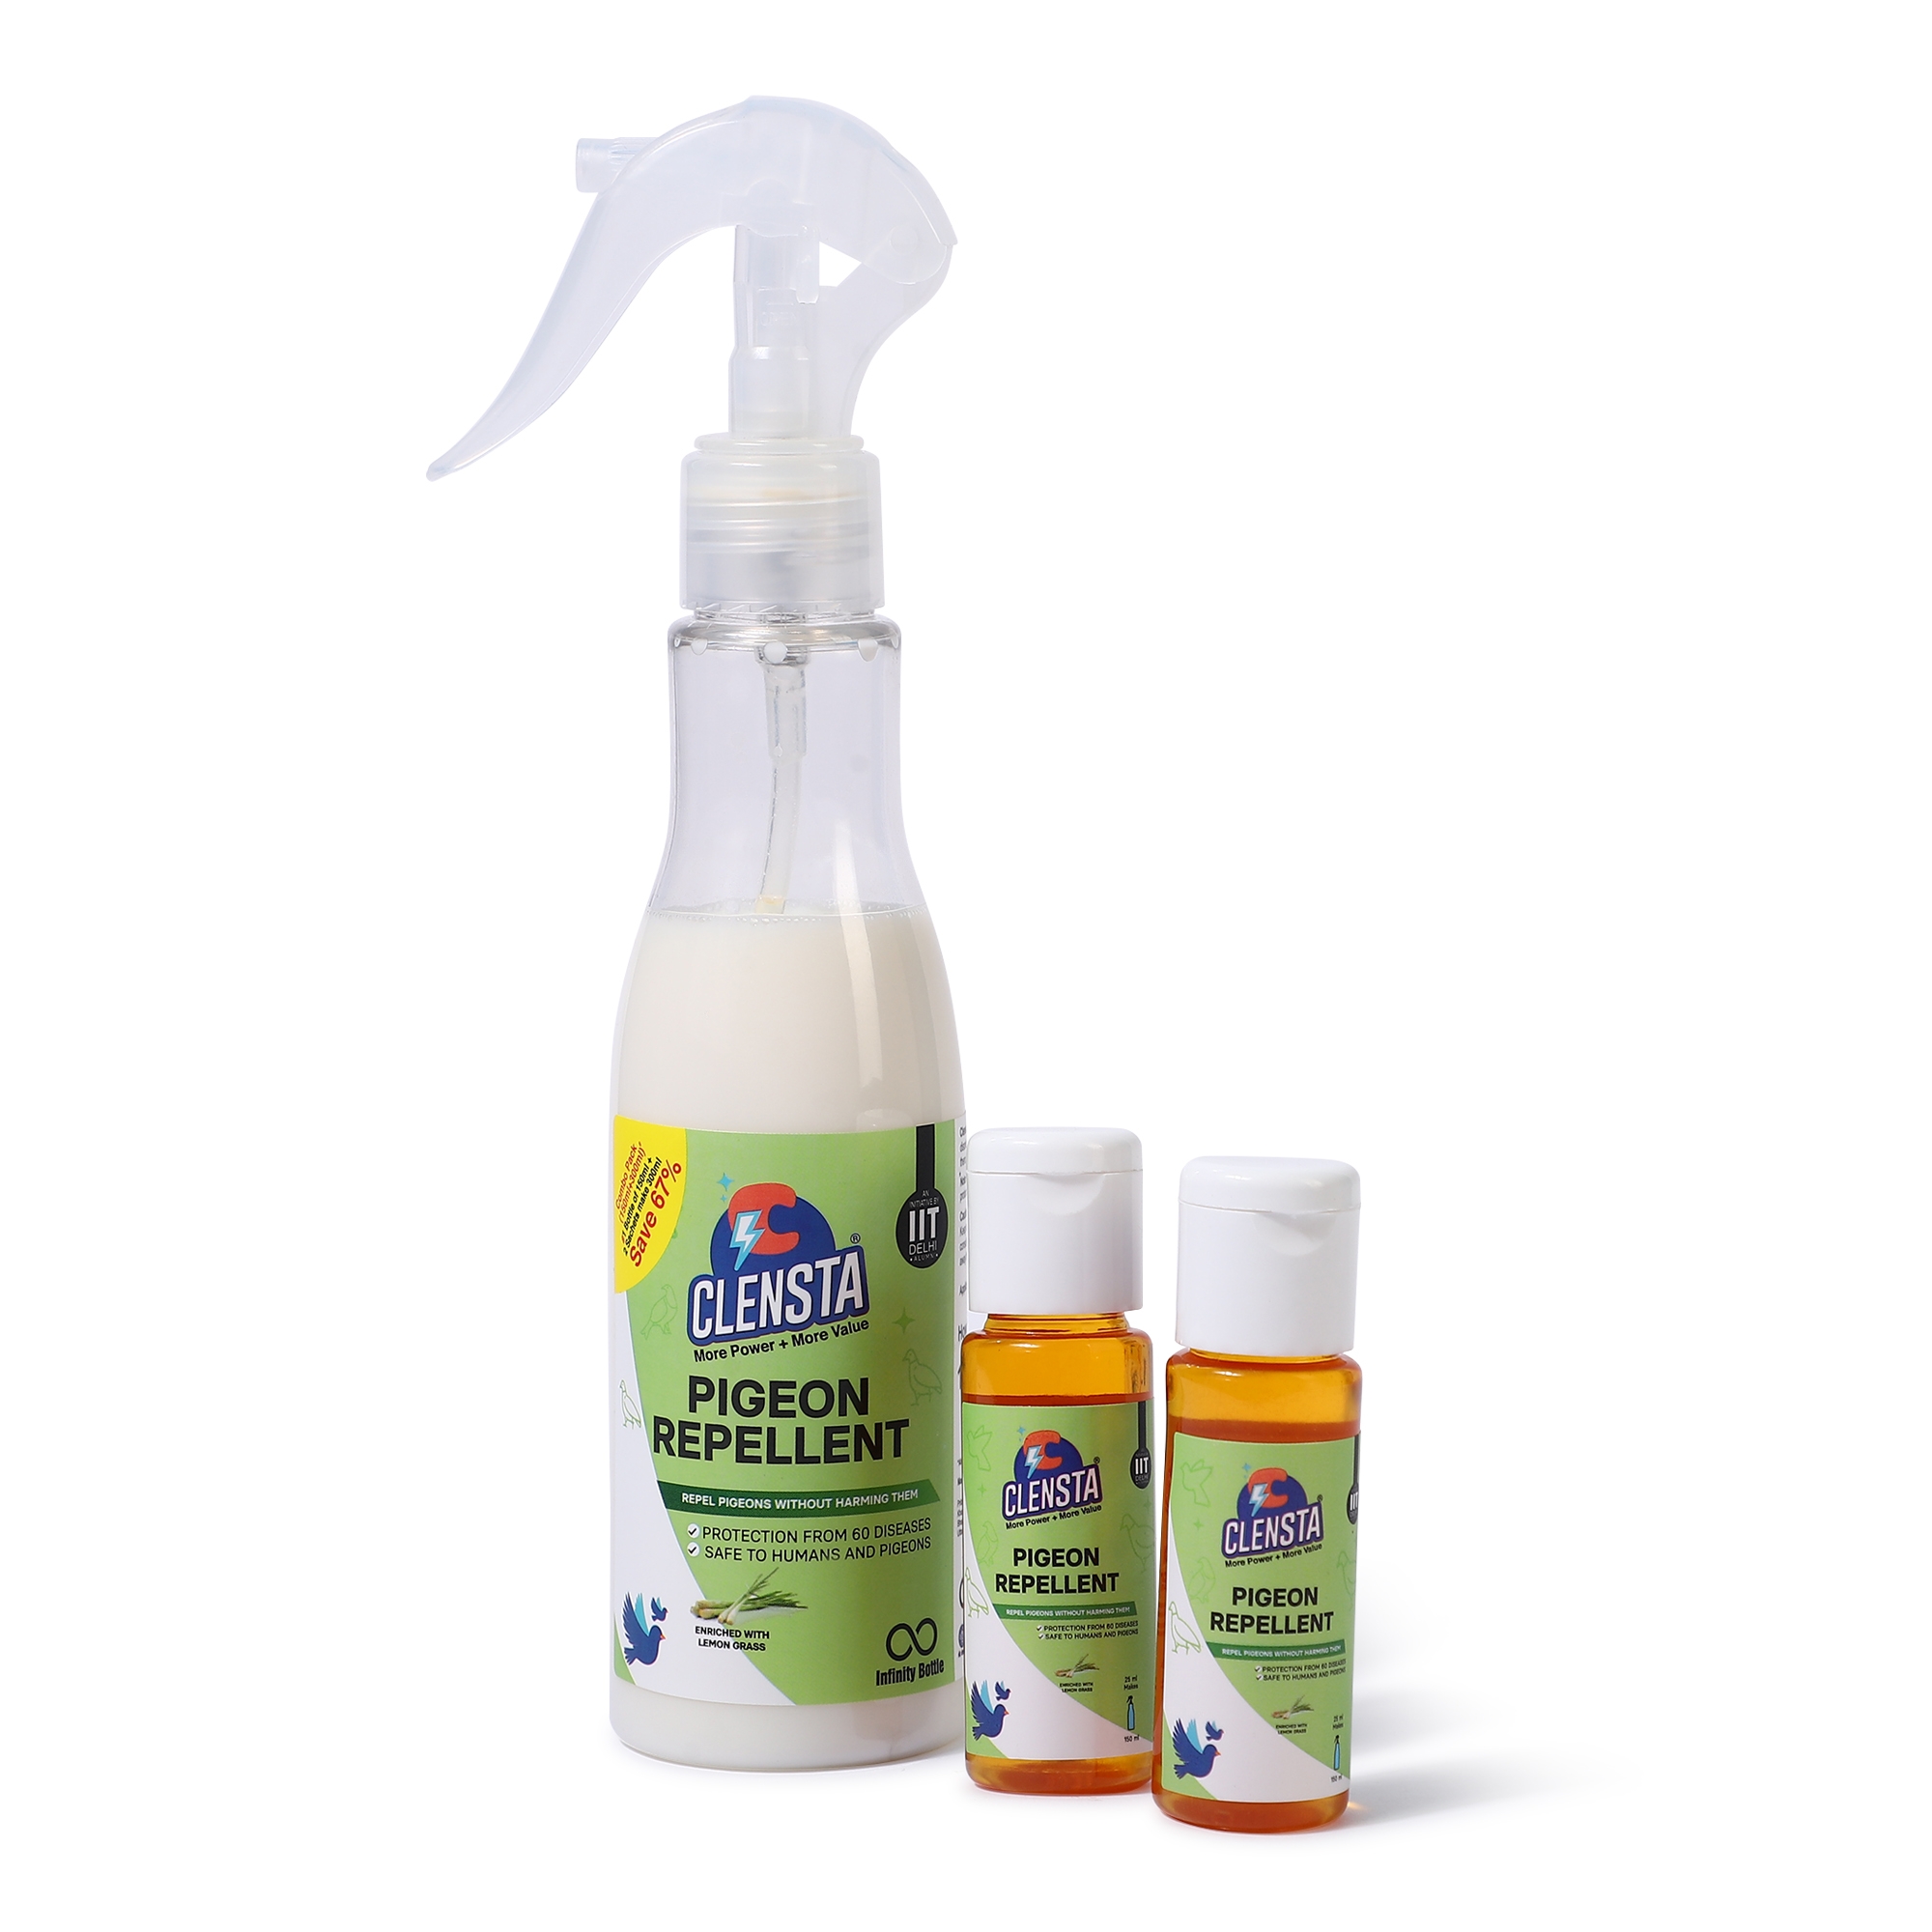 Clensta | Clensta Pigeon Repellent Spray | Harmless for Pigeon | Get Positive Results in 10 days | 1 Bottle (150 ml) & 2 Concentrates (Makes 300 ml)